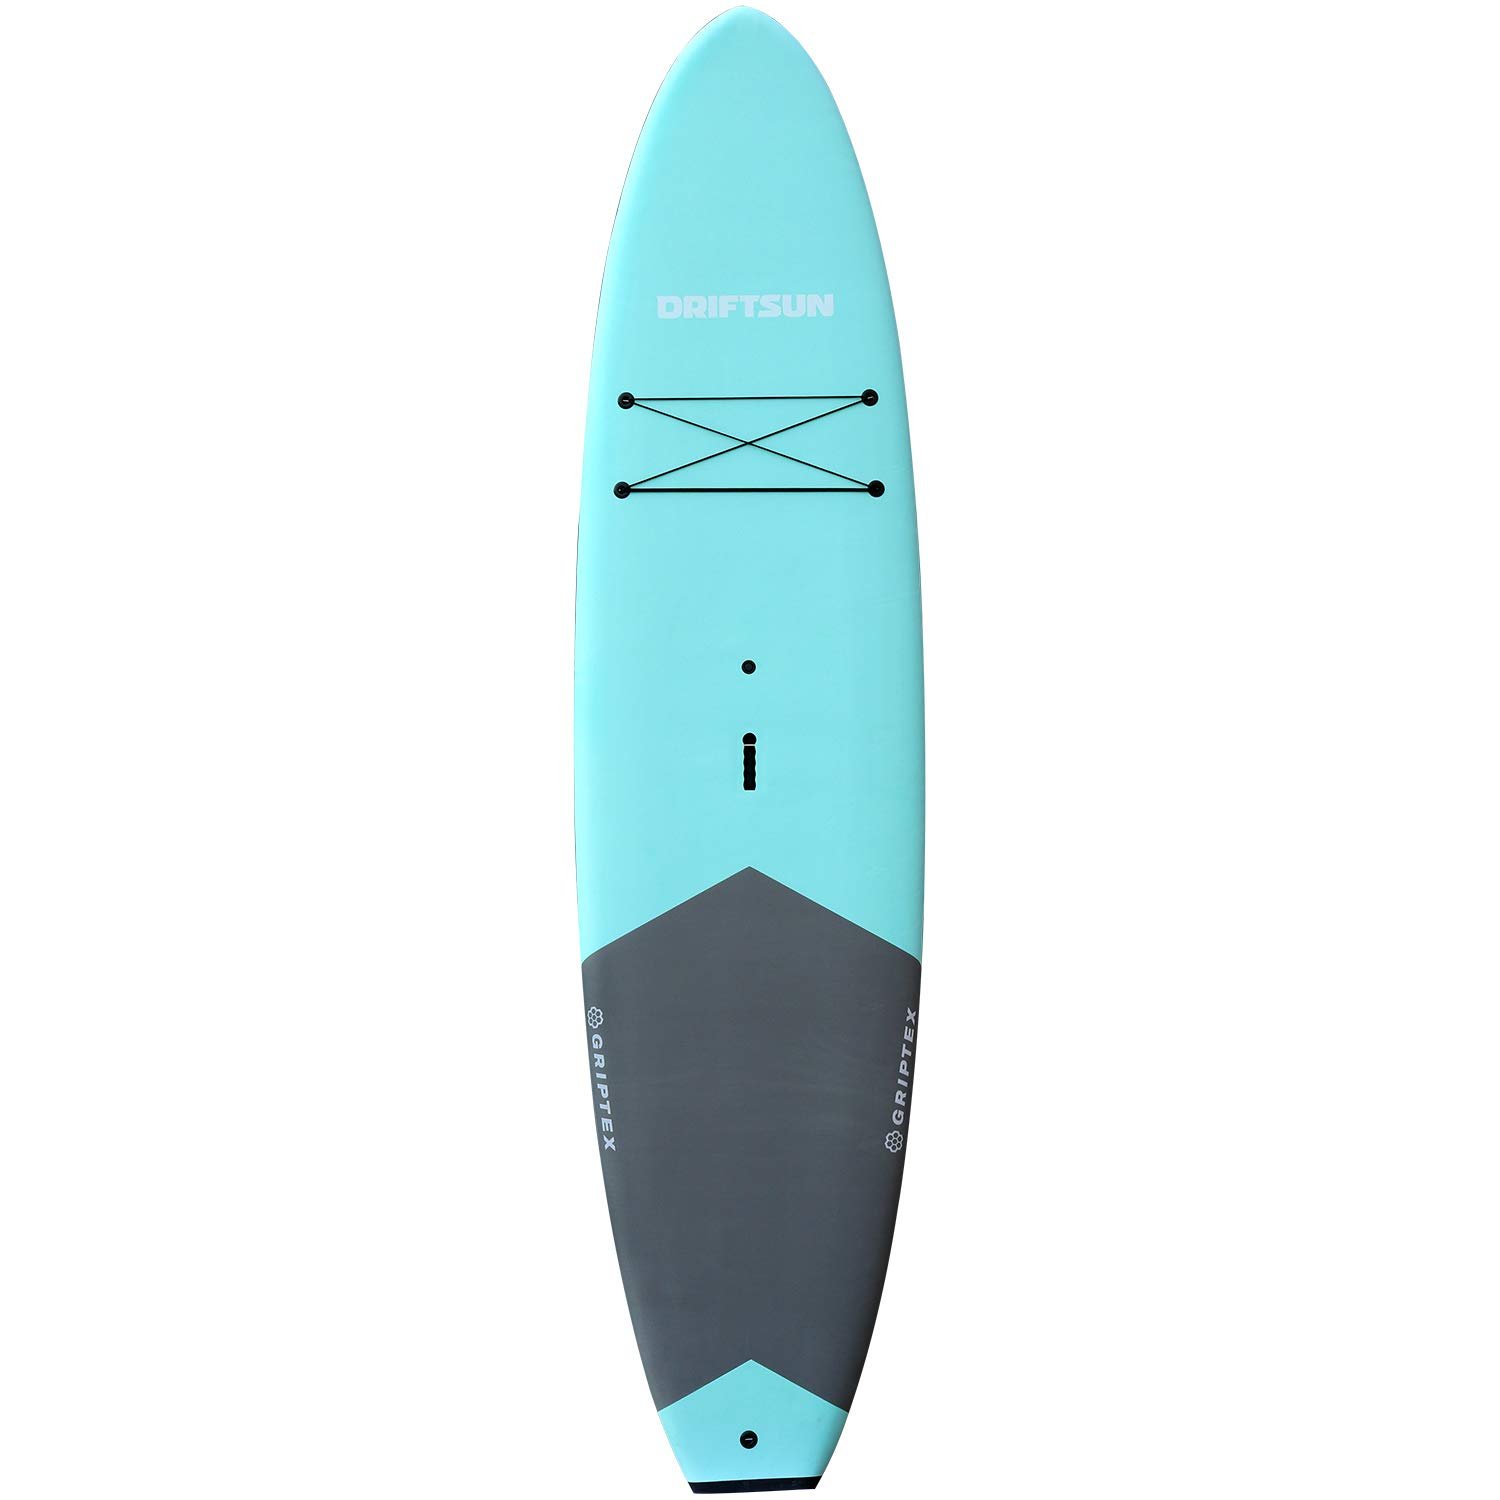 The Best Paddle Boards for Yoga